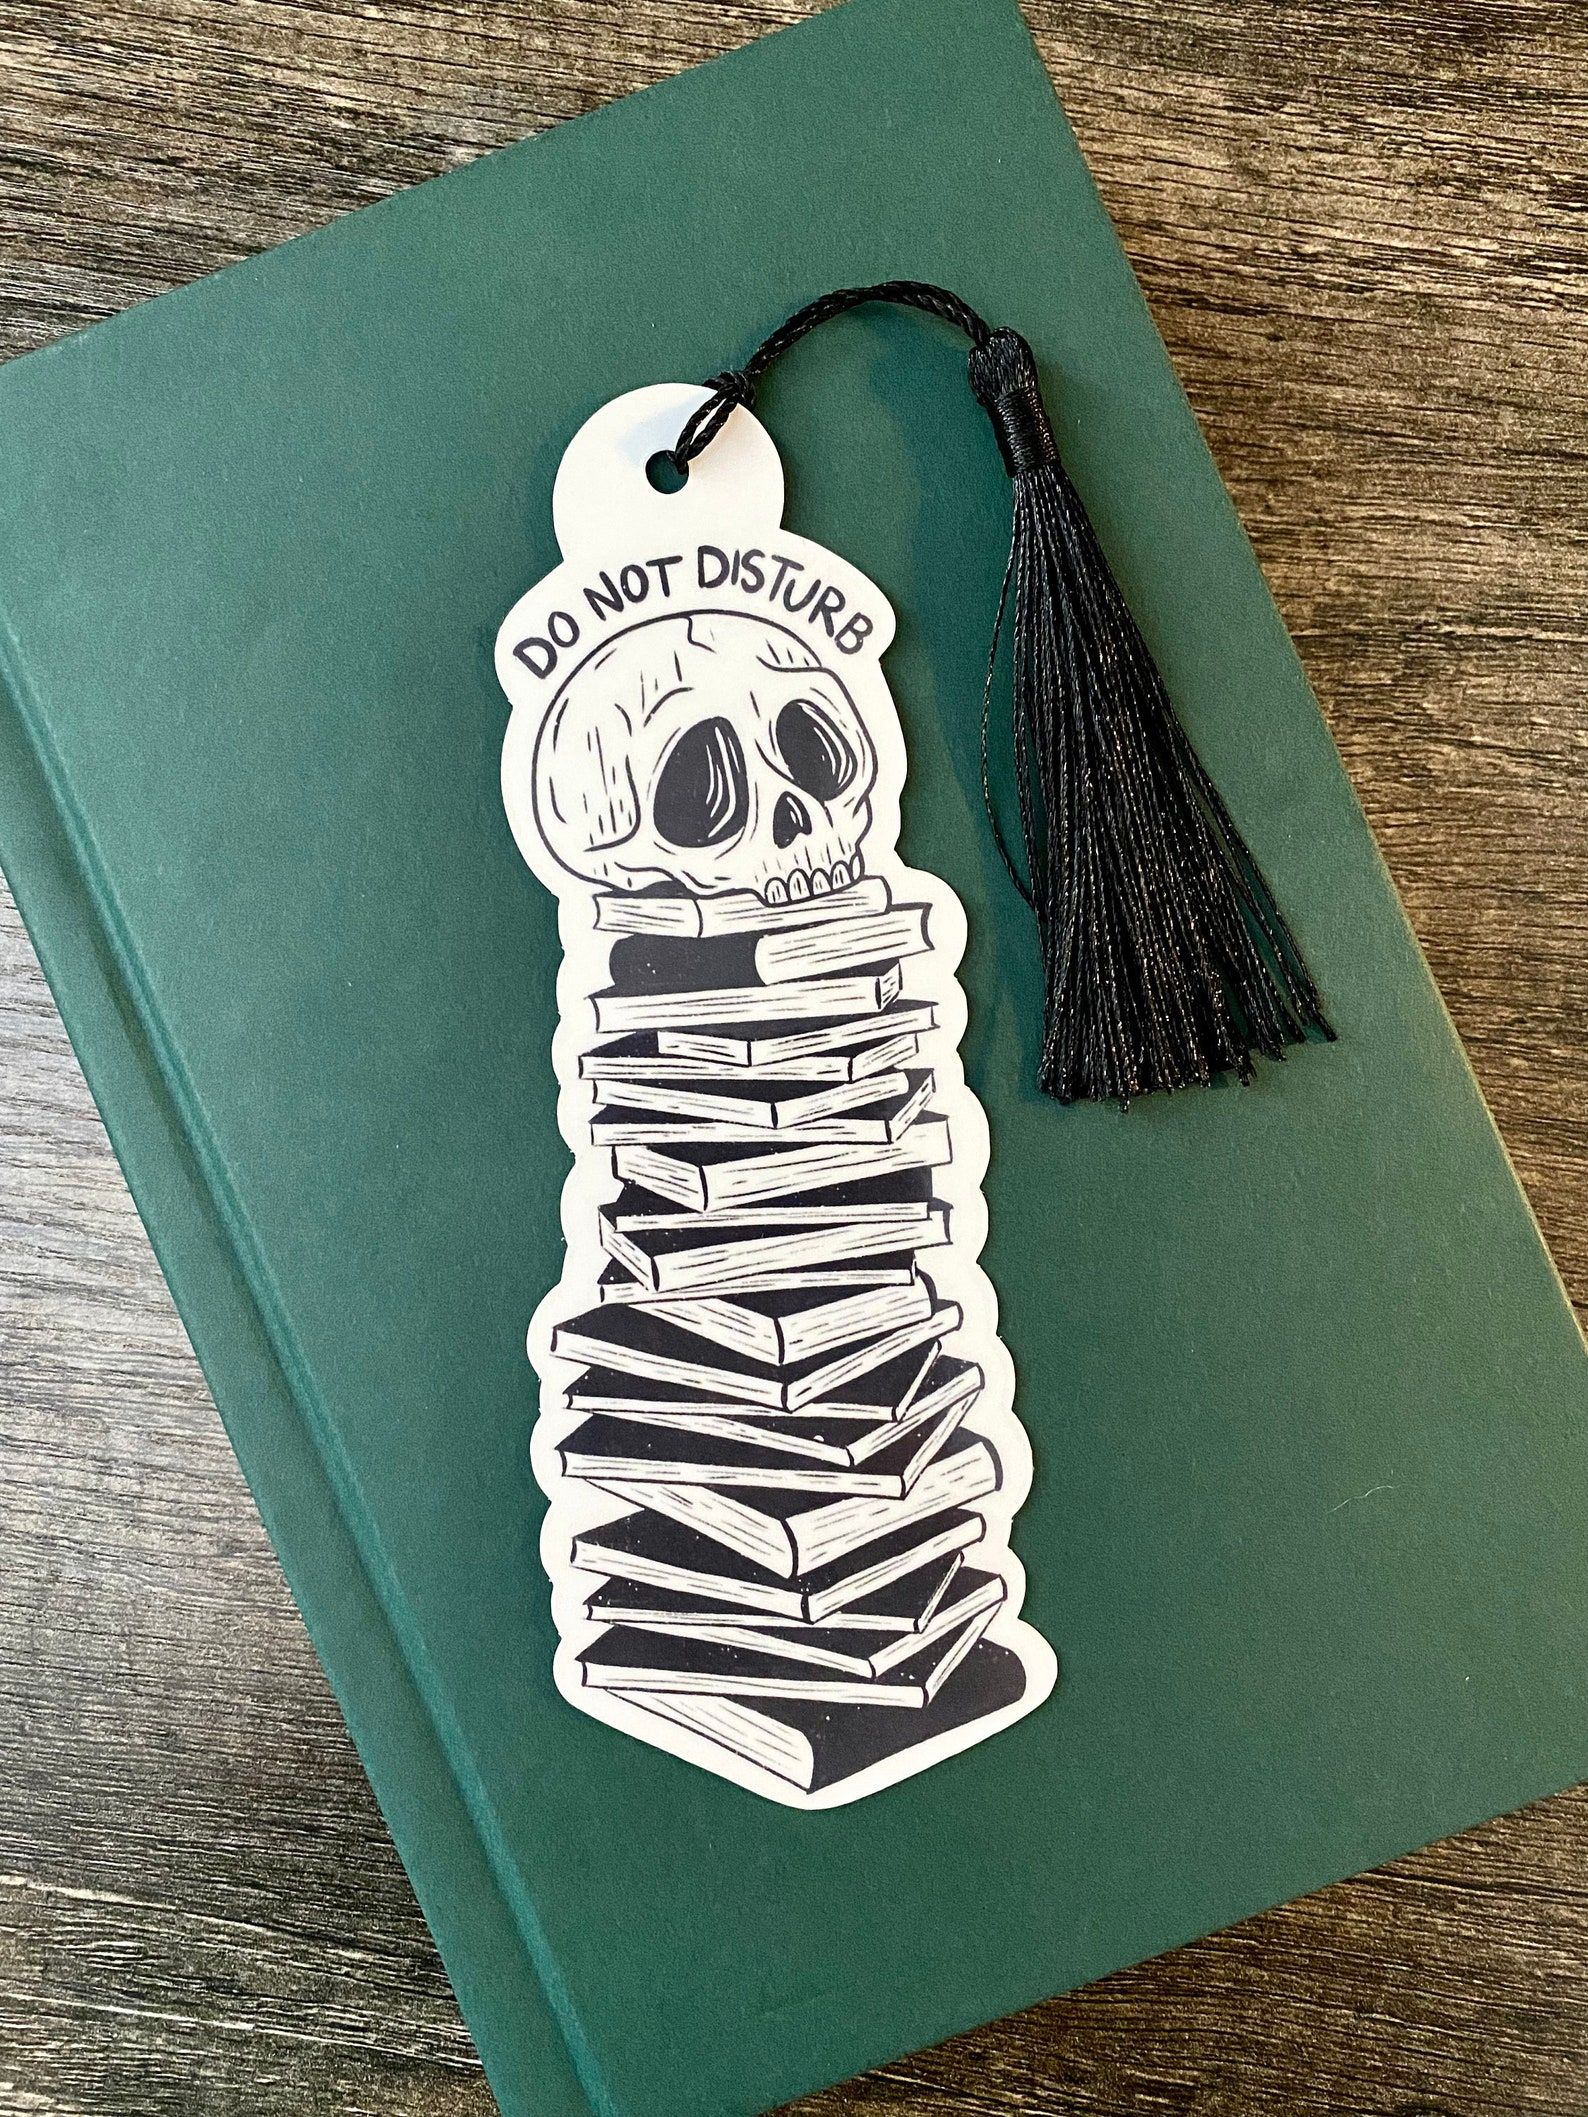 A bookmark featuring a stack of books with a skull on top and the words "do not disturb"